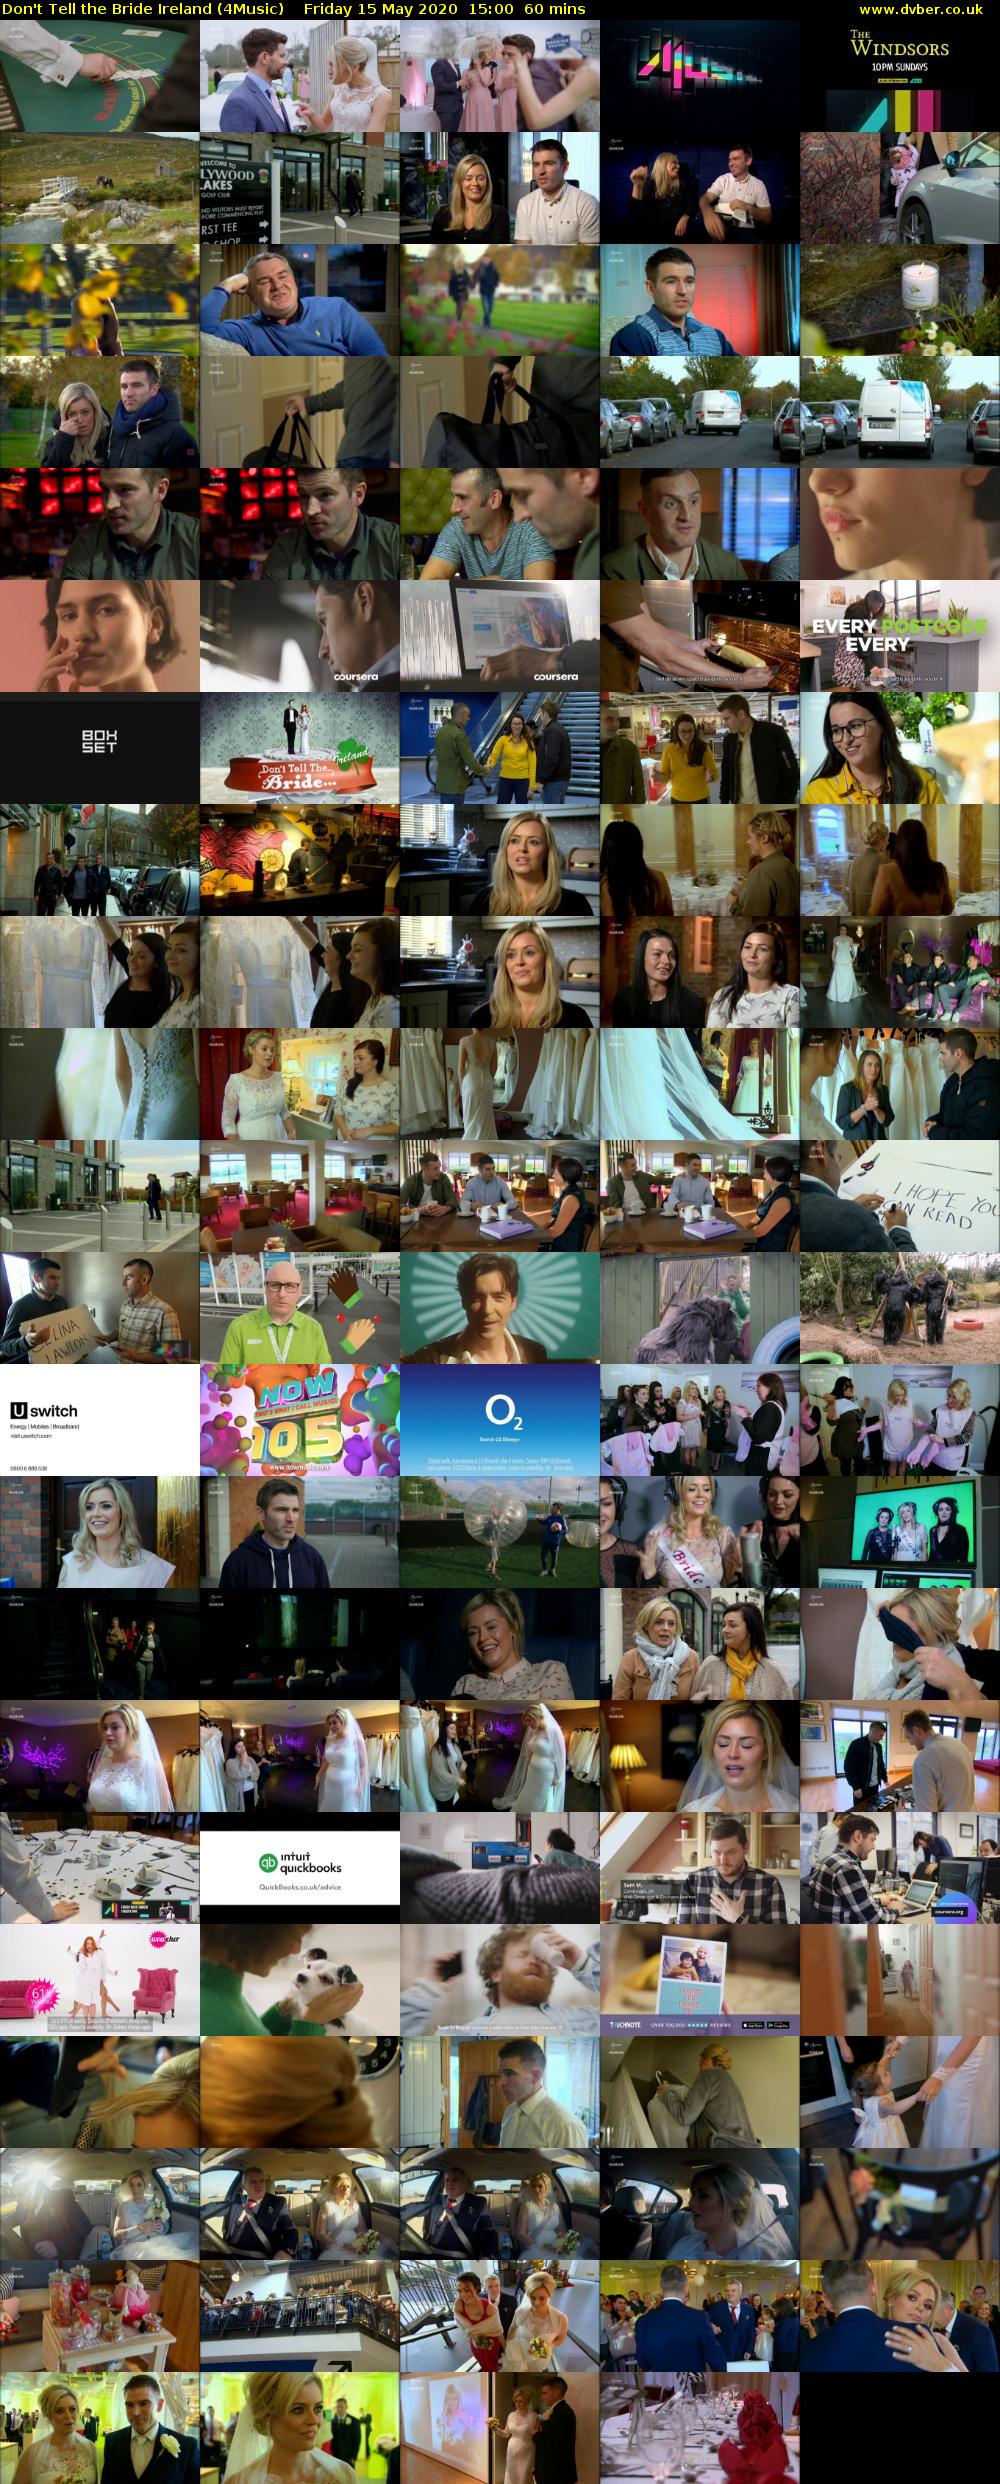 Don't Tell the Bride Ireland (4Music) Friday 15 May 2020 15:00 - 16:00